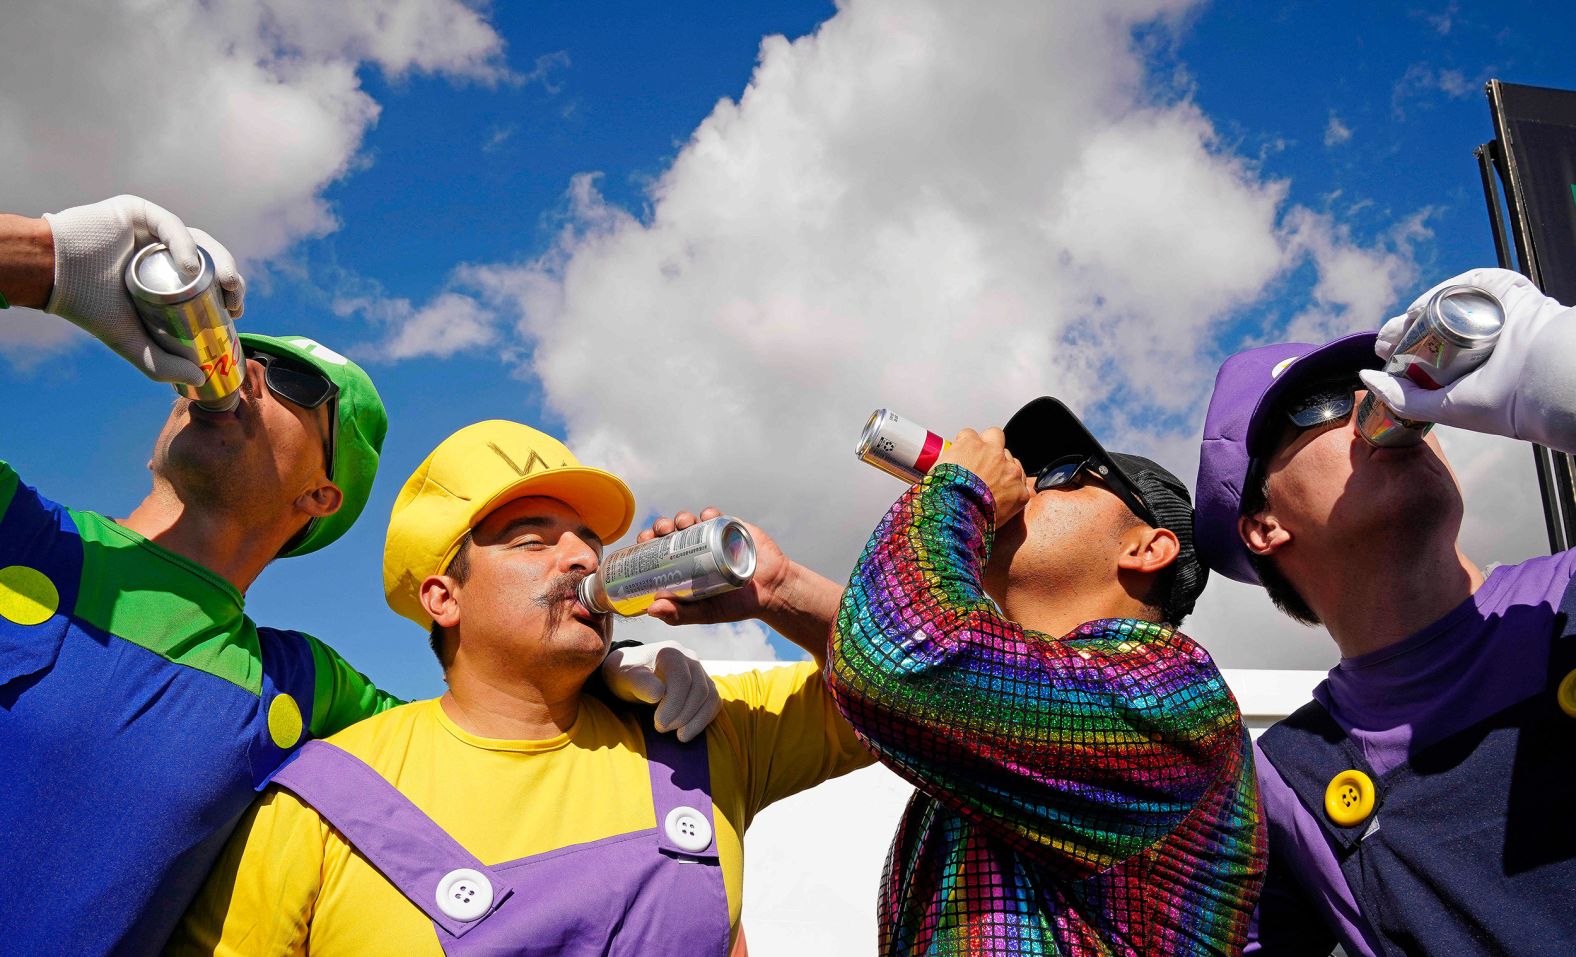 Costumed golf fans — from left, Grant Collinson, Cody Zavala, Juan Ruiz and Brett Beehler — drink beers while attending the WM Phoenix Open on Saturday, February 10. The tournament is renowned for its raucous atmosphere, but there were various crowd-related incidents this week that included arrests, fights and clashes between golfers and fans.